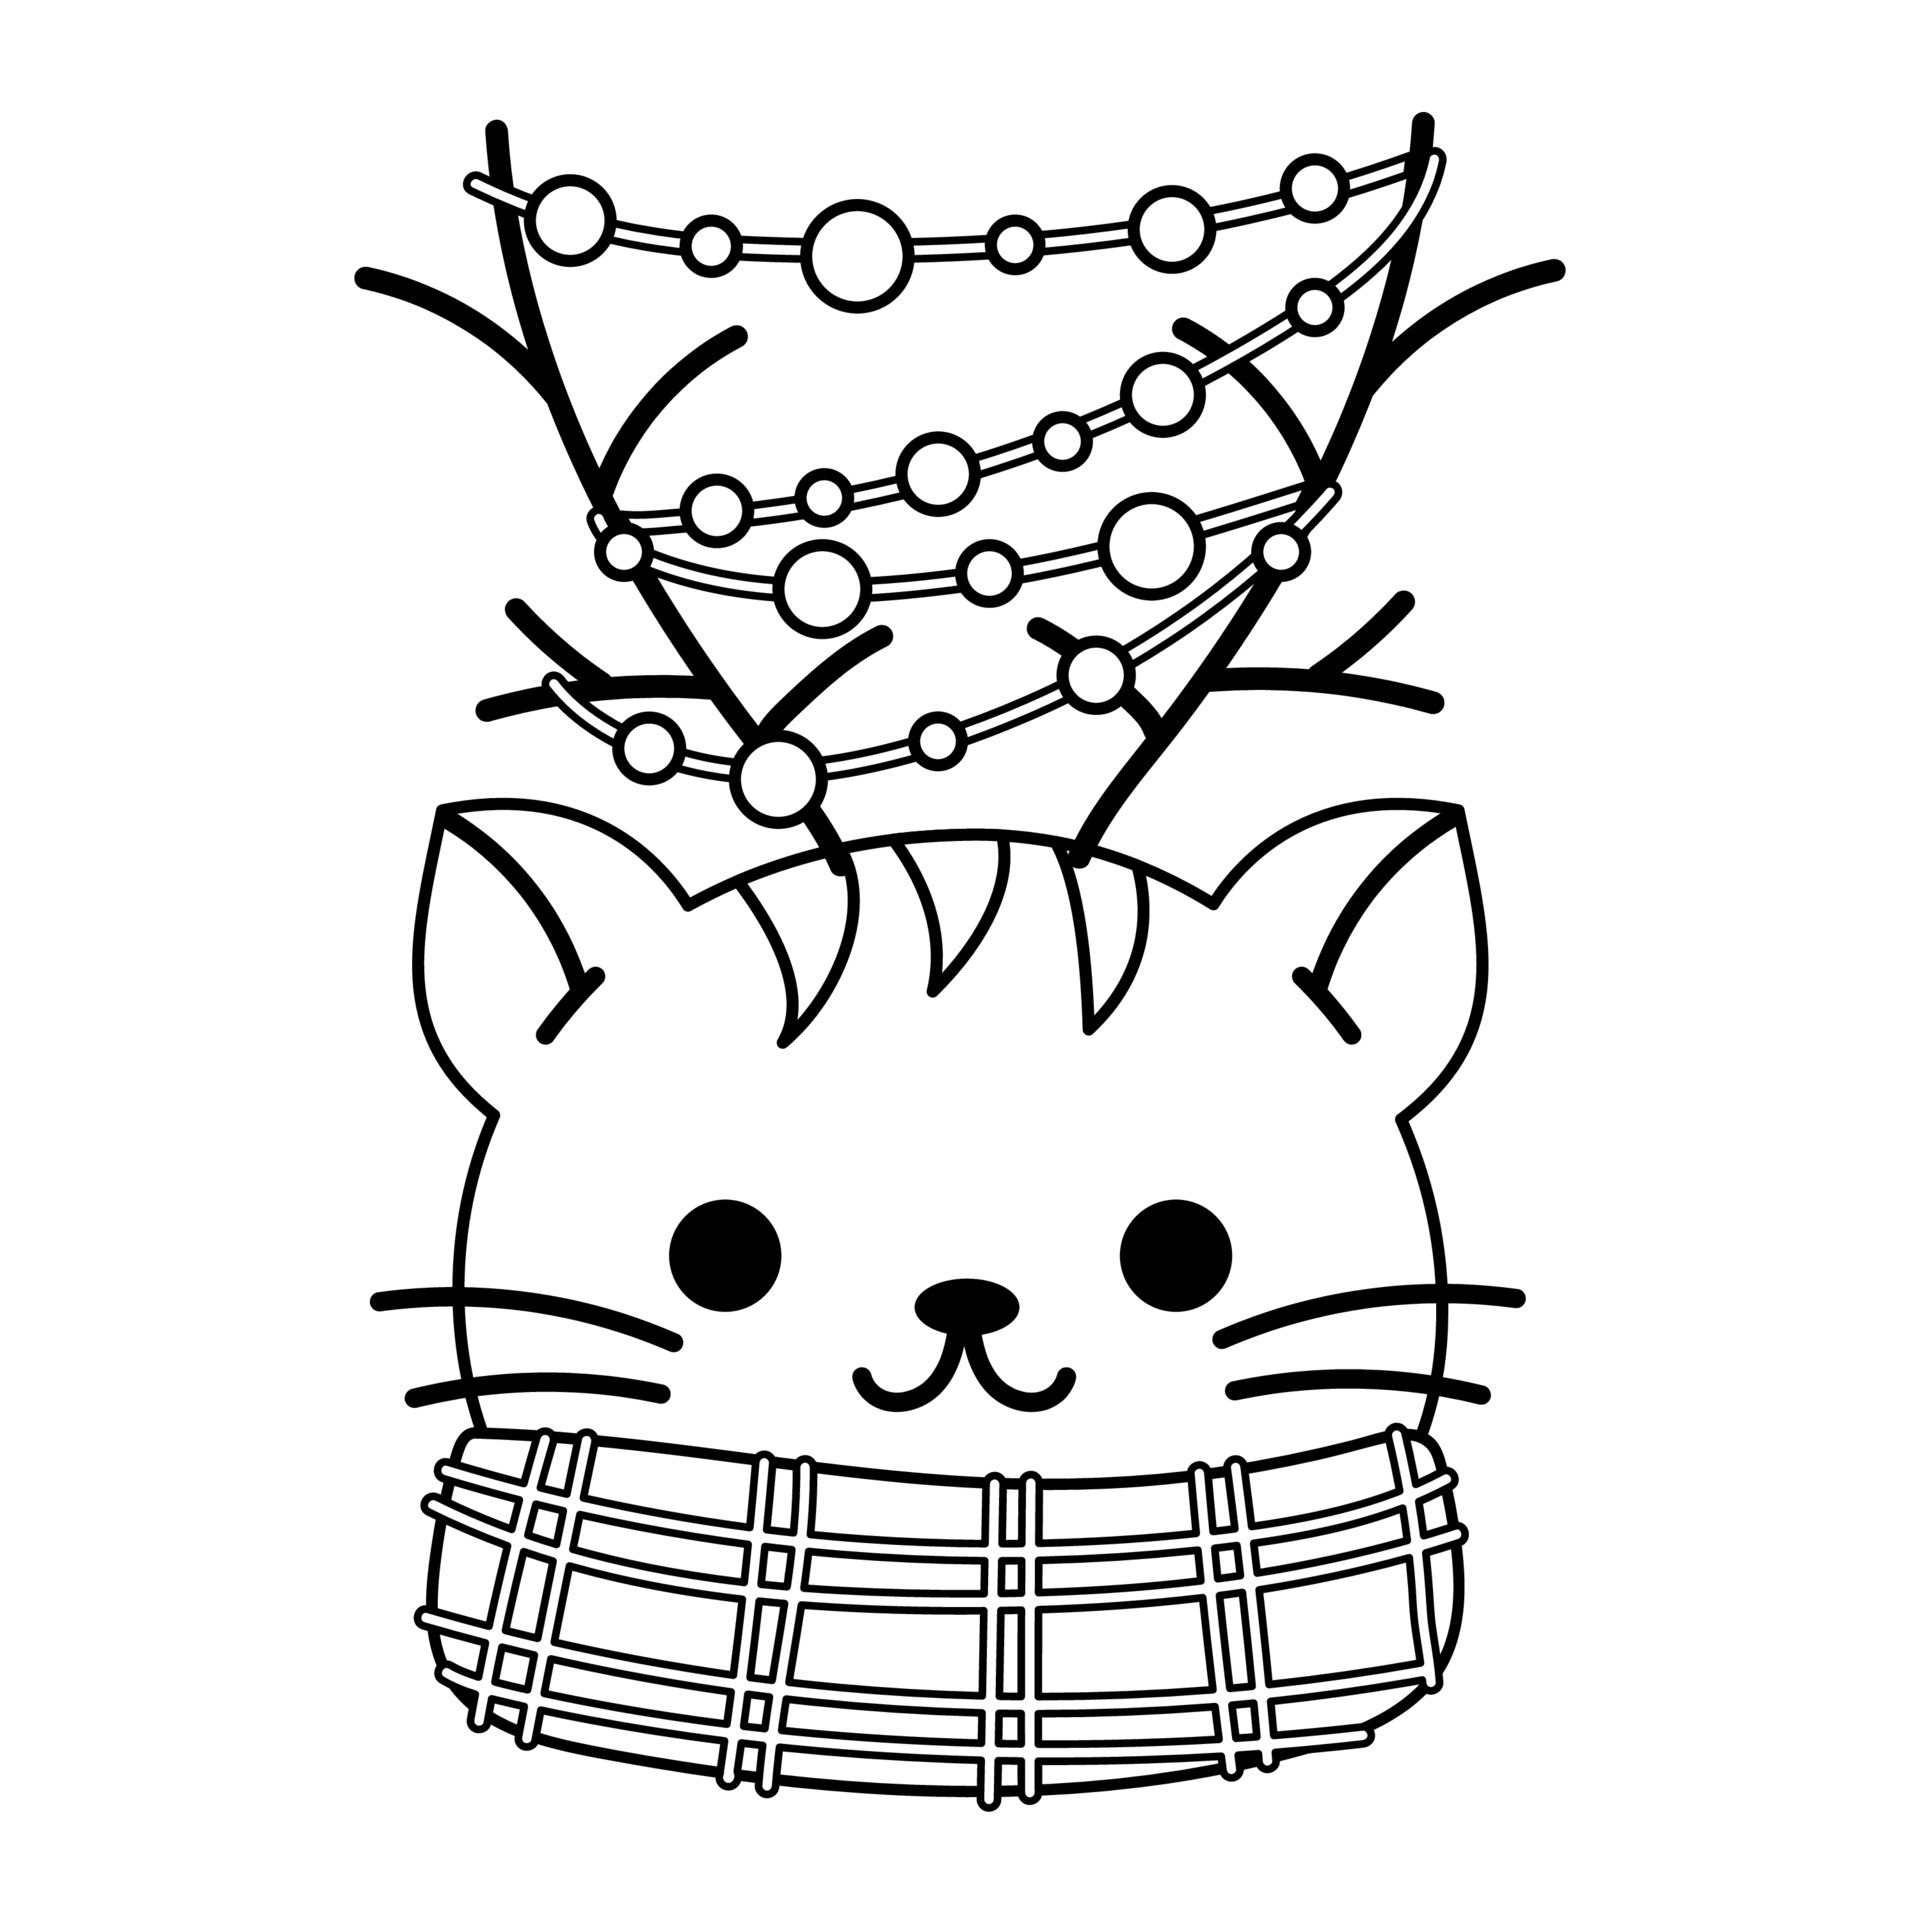 https://static.vecteezy.com/system/resources/previews/014/049/948/original/coloring-page-of-cute-cartoon-cat-vector.jpg